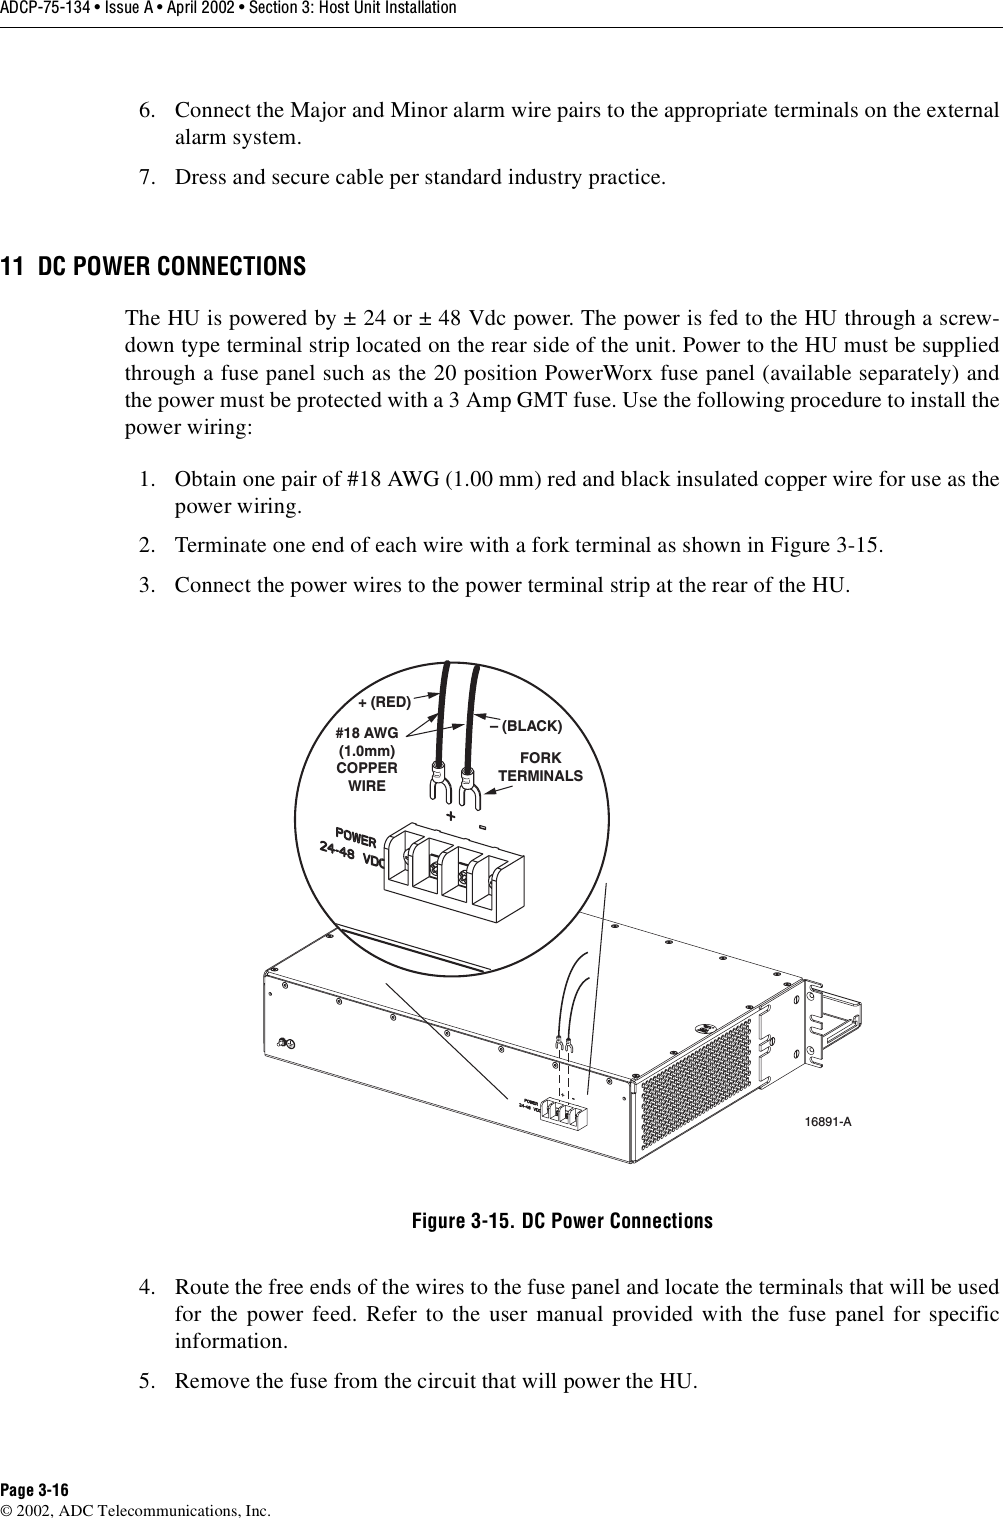 ADCP-75-134 • Issue A • April 2002 • Section 3: Host Unit InstallationPage 3-16©2002, ADC Telecommunications, Inc.6. Connect the Major and Minor alarm wire pairs to the appropriate terminals on the externalalarm system.7. Dress and secure cable per standard industry practice.11 DC POWER CONNECTIONSThe HU is powered by ±24 or ±48 Vdc power. The power is fed to the HU through ascrew-down type terminal strip located on the rear side of the unit. Power to the HU must be suppliedthrough afuse panel such as the 20 position PowerWorx fuse panel (available separately) andthe power must be protected with a 3 Amp GMT fuse. Use the following procedure to install thepower wiring:1. Obtain one pair of #18 AWG (1.00 mm) red and black insulated copper wire for use as thepower wiring.2. Terminate one end of each wire with afork terminal as shown in Figure 3-15.3. Connect the power wires to the power terminal strip at the rear of the HU.Figure 3-15. DC Power Connections4. Route the free ends of the wires to the fuse panel and locate the terminals that will be usedfor the power feed. Refer to the user manual provided with the fuse panel for specificinformation.5. Remove the fuse from the circuit that will power the HU.FORKTERMINALS#18 AWG(1.0mm)COPPERWIRE+ (RED)– (BLACK)16891-A